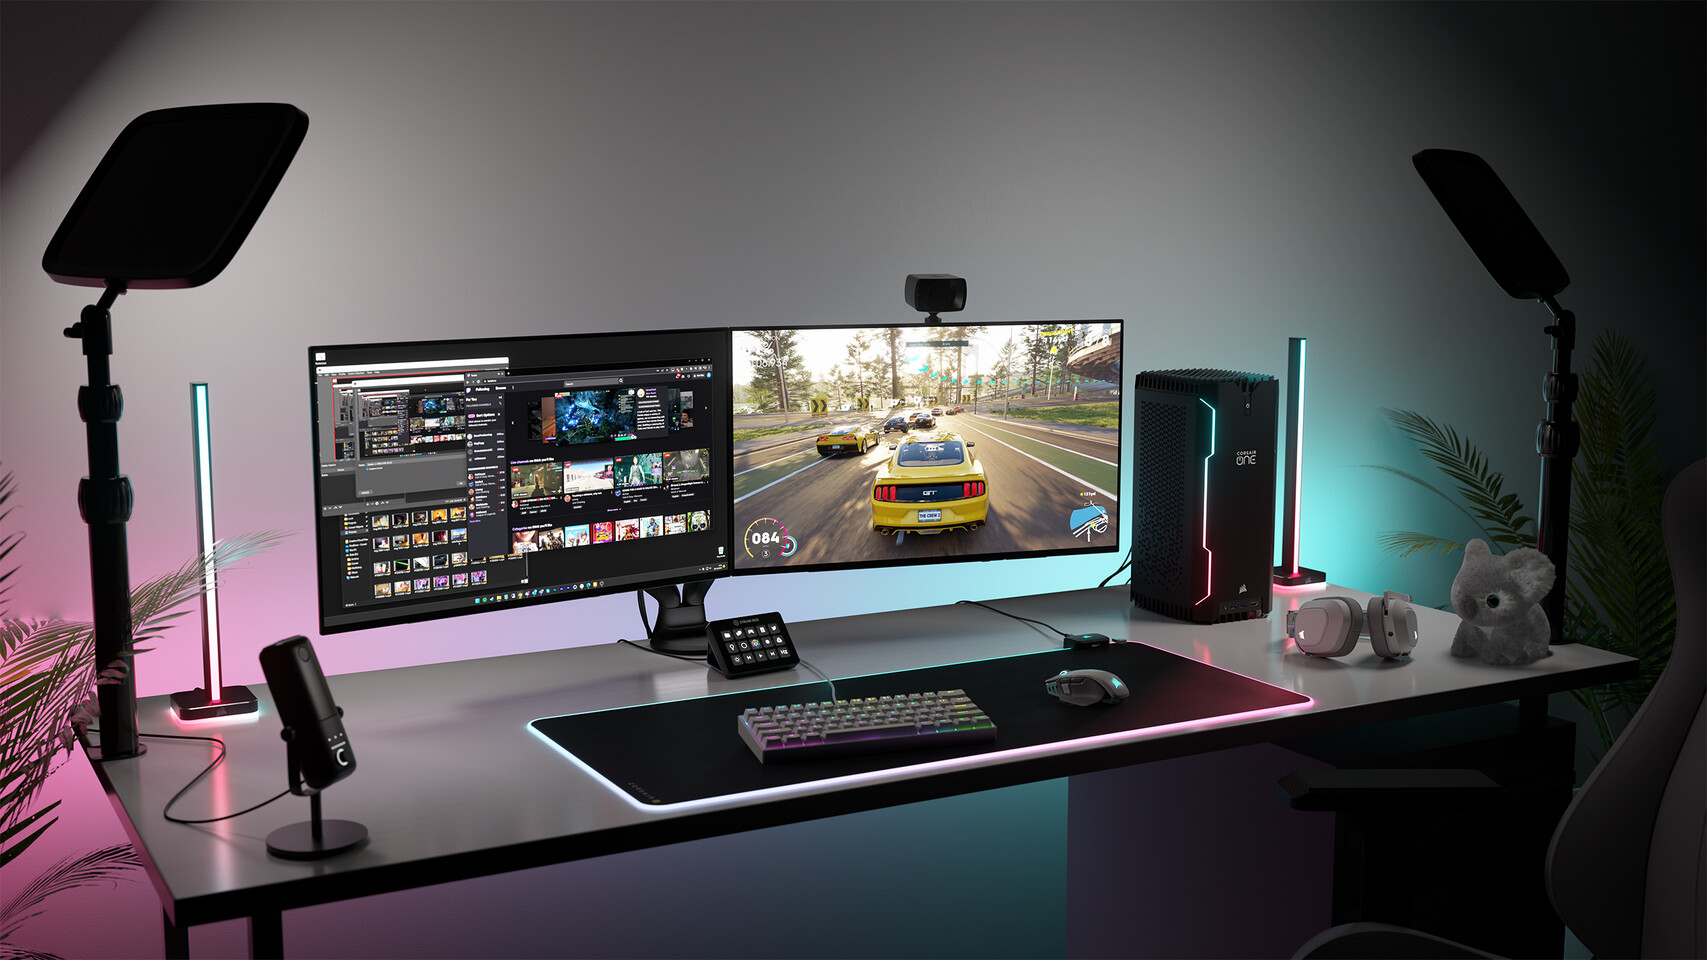 Asus and MSI quietly extend OLED monitor warranties with improved OLED burn-in  coverage -  News